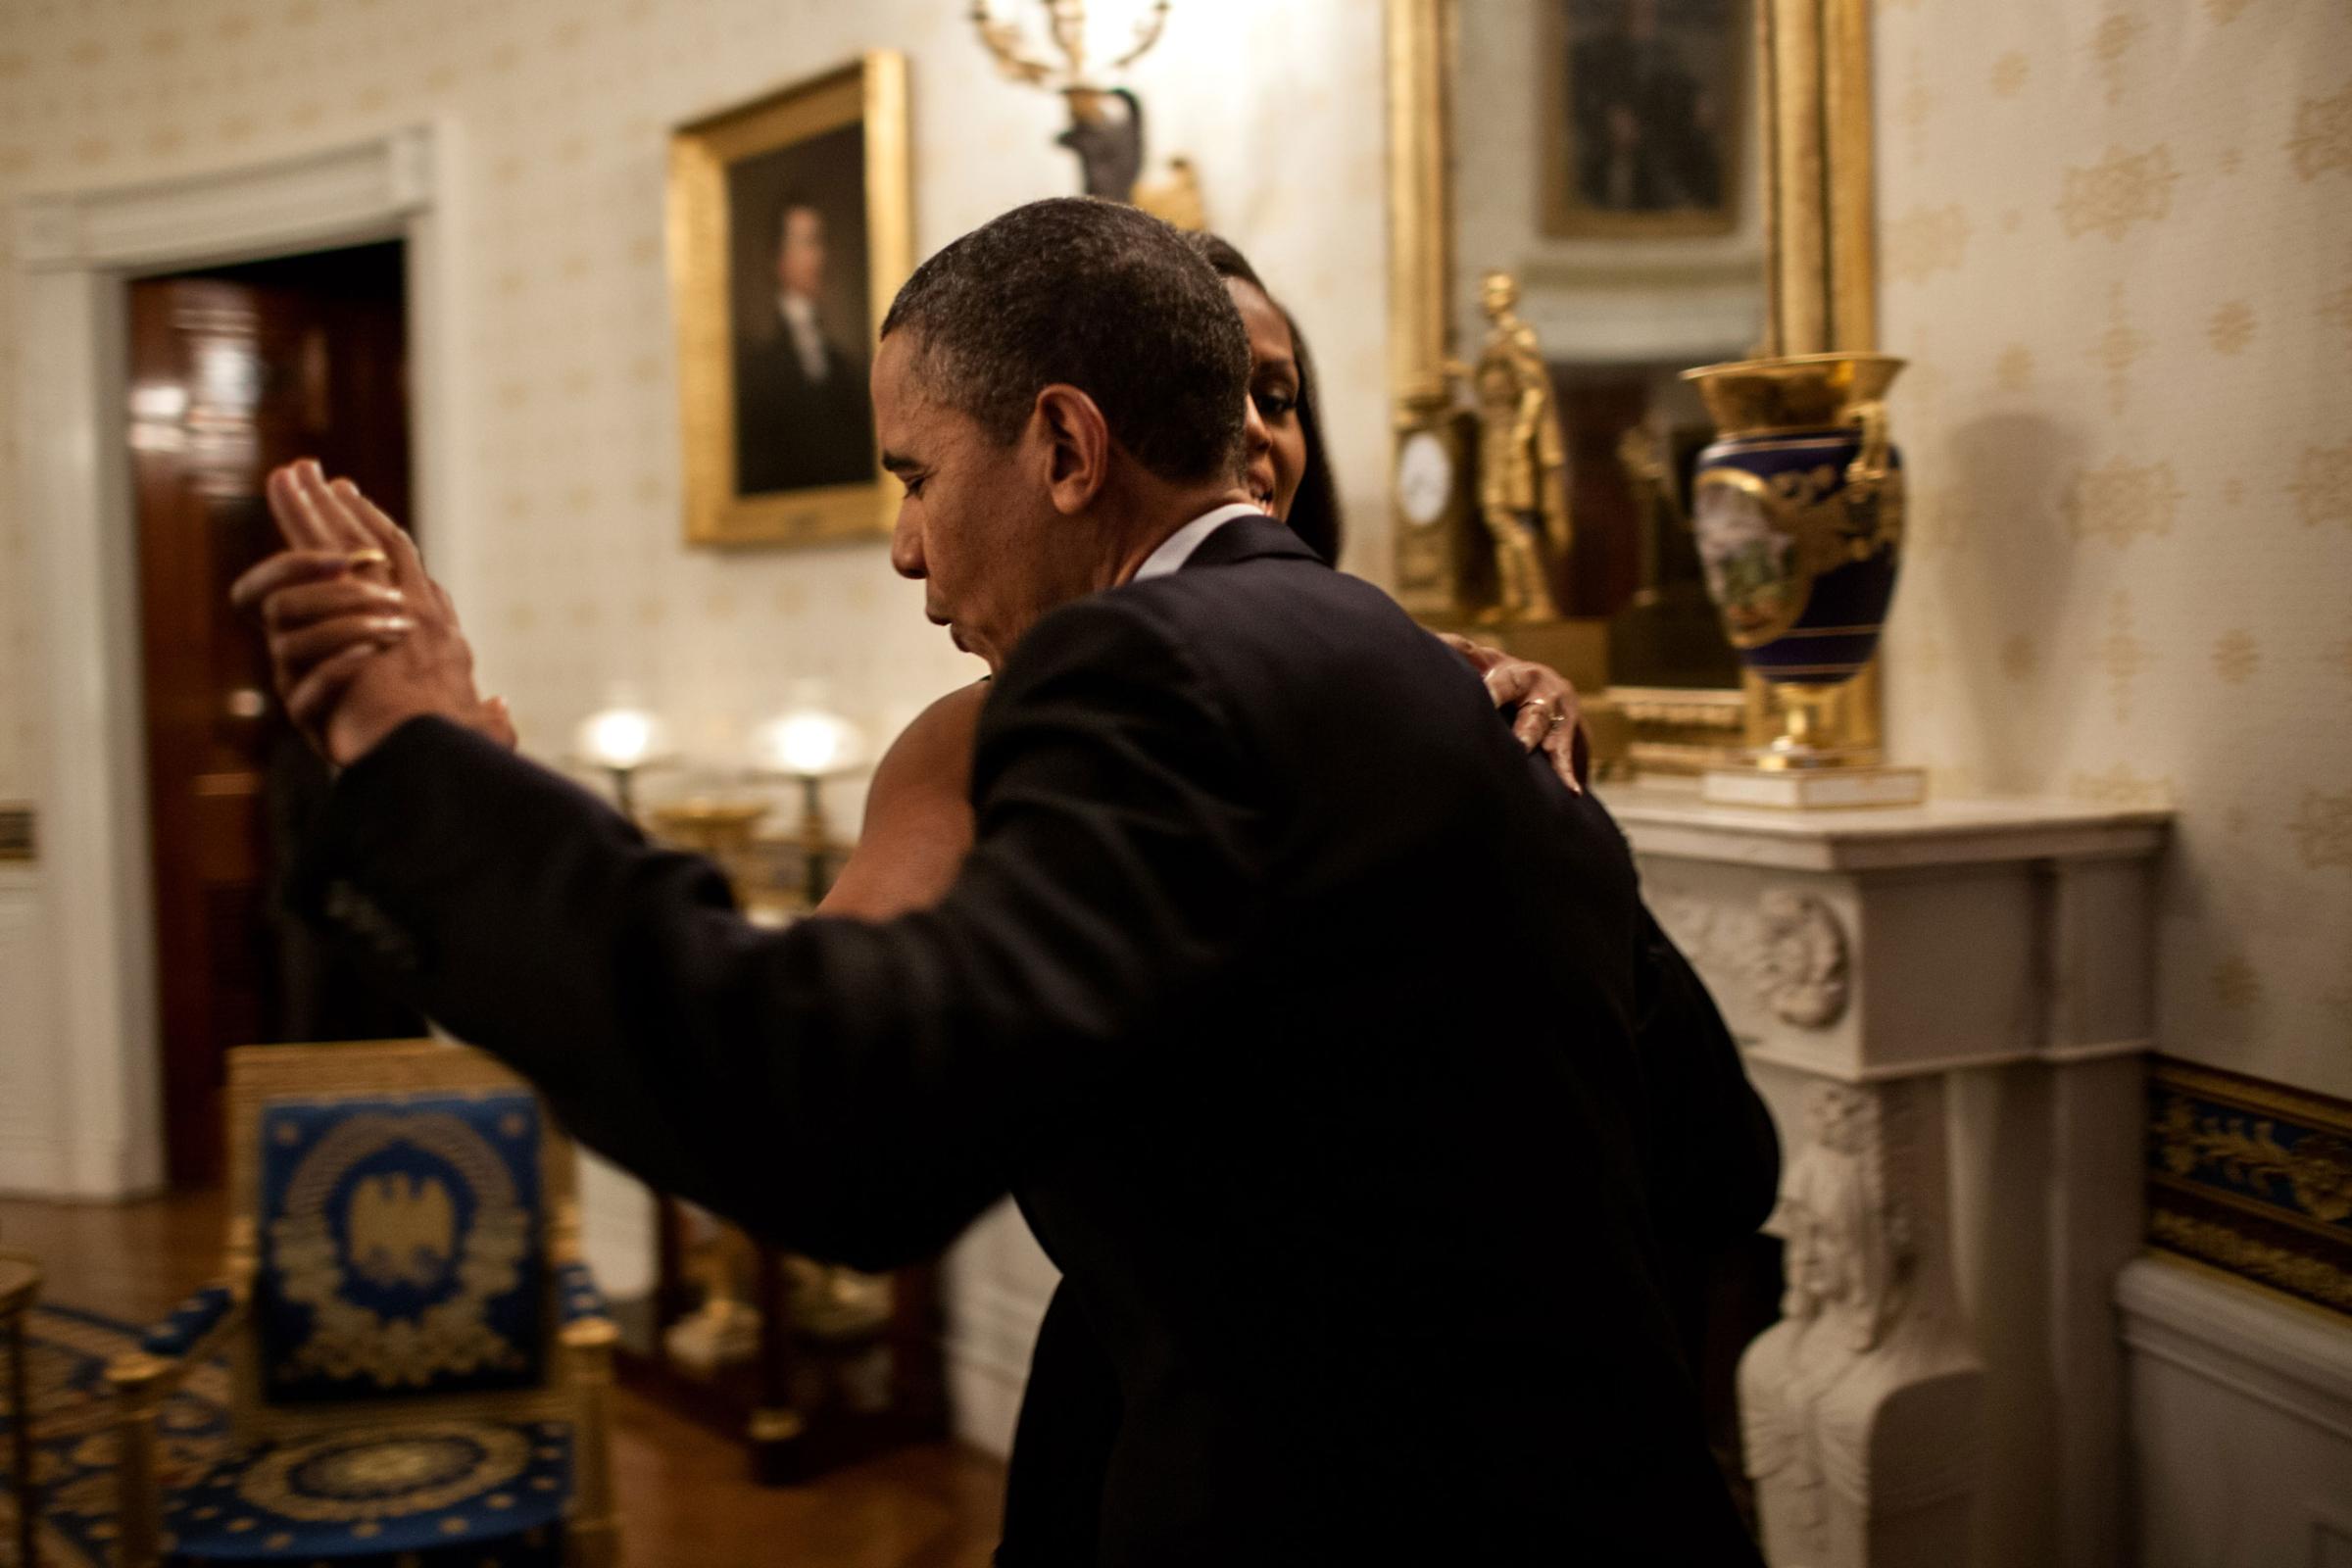 President Barack Obama dances with First Lady Michelle Obama in the Blue Room of the White House prior to an "In Performance at the White House" series concert honoring songwriters Burt Bacharach and Hal David, May 9, 2012. During the concert the President presented Bacharach and Eunice David, on behalf of her husband, with the Library of Congress Gershwin Prize for Popular Song.